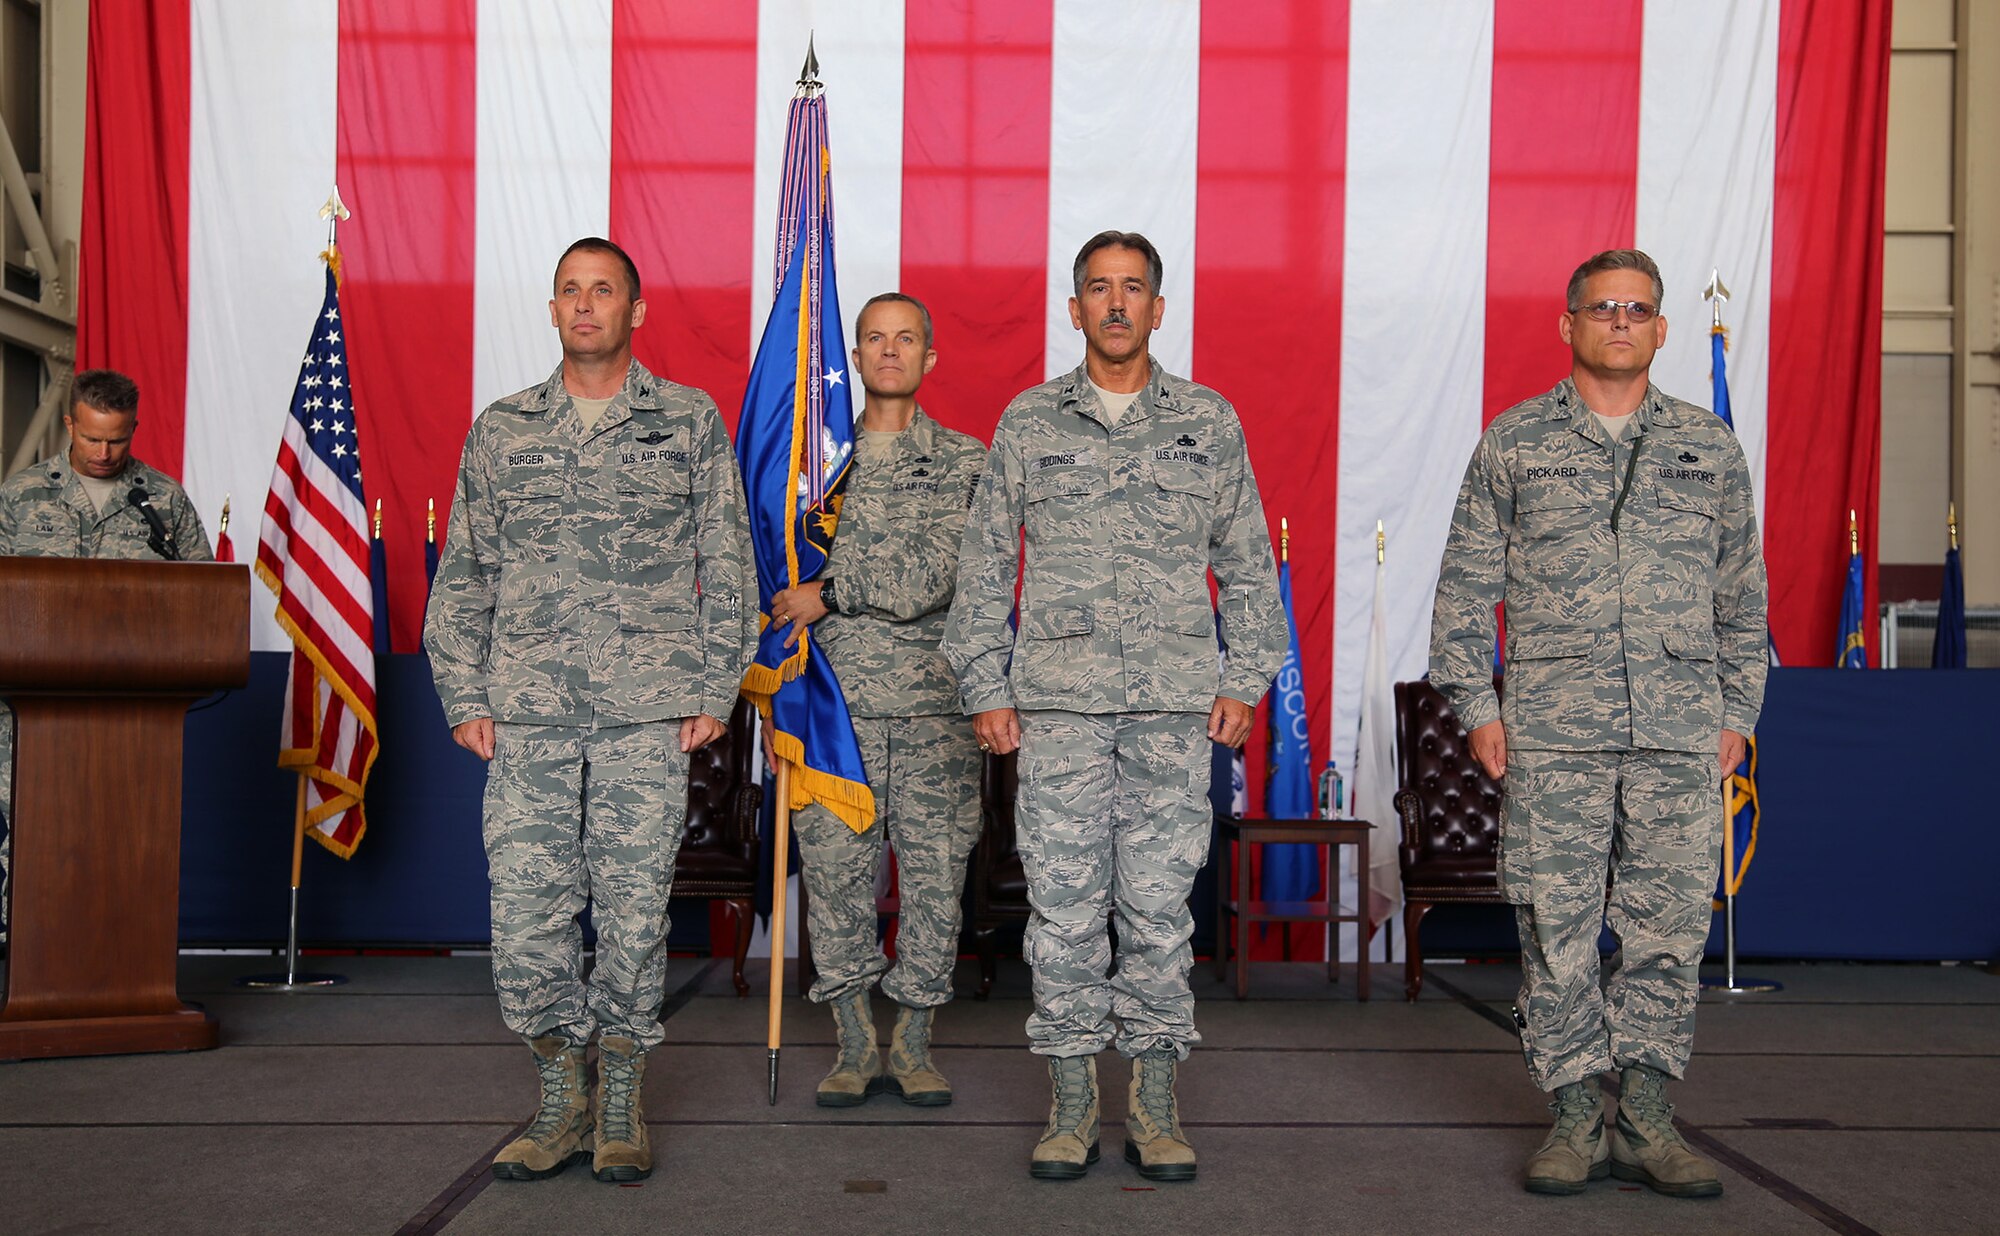 TRAVIS AIR FORCE BASE, Calif. -- Outgoing 349th Maintenance Group commander, Col. Sonny Giddings, center, relinquishes command. Col. Matt Burger, commander of the 349th Air Mobility Wing, left, officiates during ceremony at Travis Air Force Base, Calif., Sept. 22, 2013. A moment later, Col. Jeff Pickard, at right, received the flag and accepted command of the Group. (U.S. Air Force photo/Lt. Col. Robert Couse-Baker)